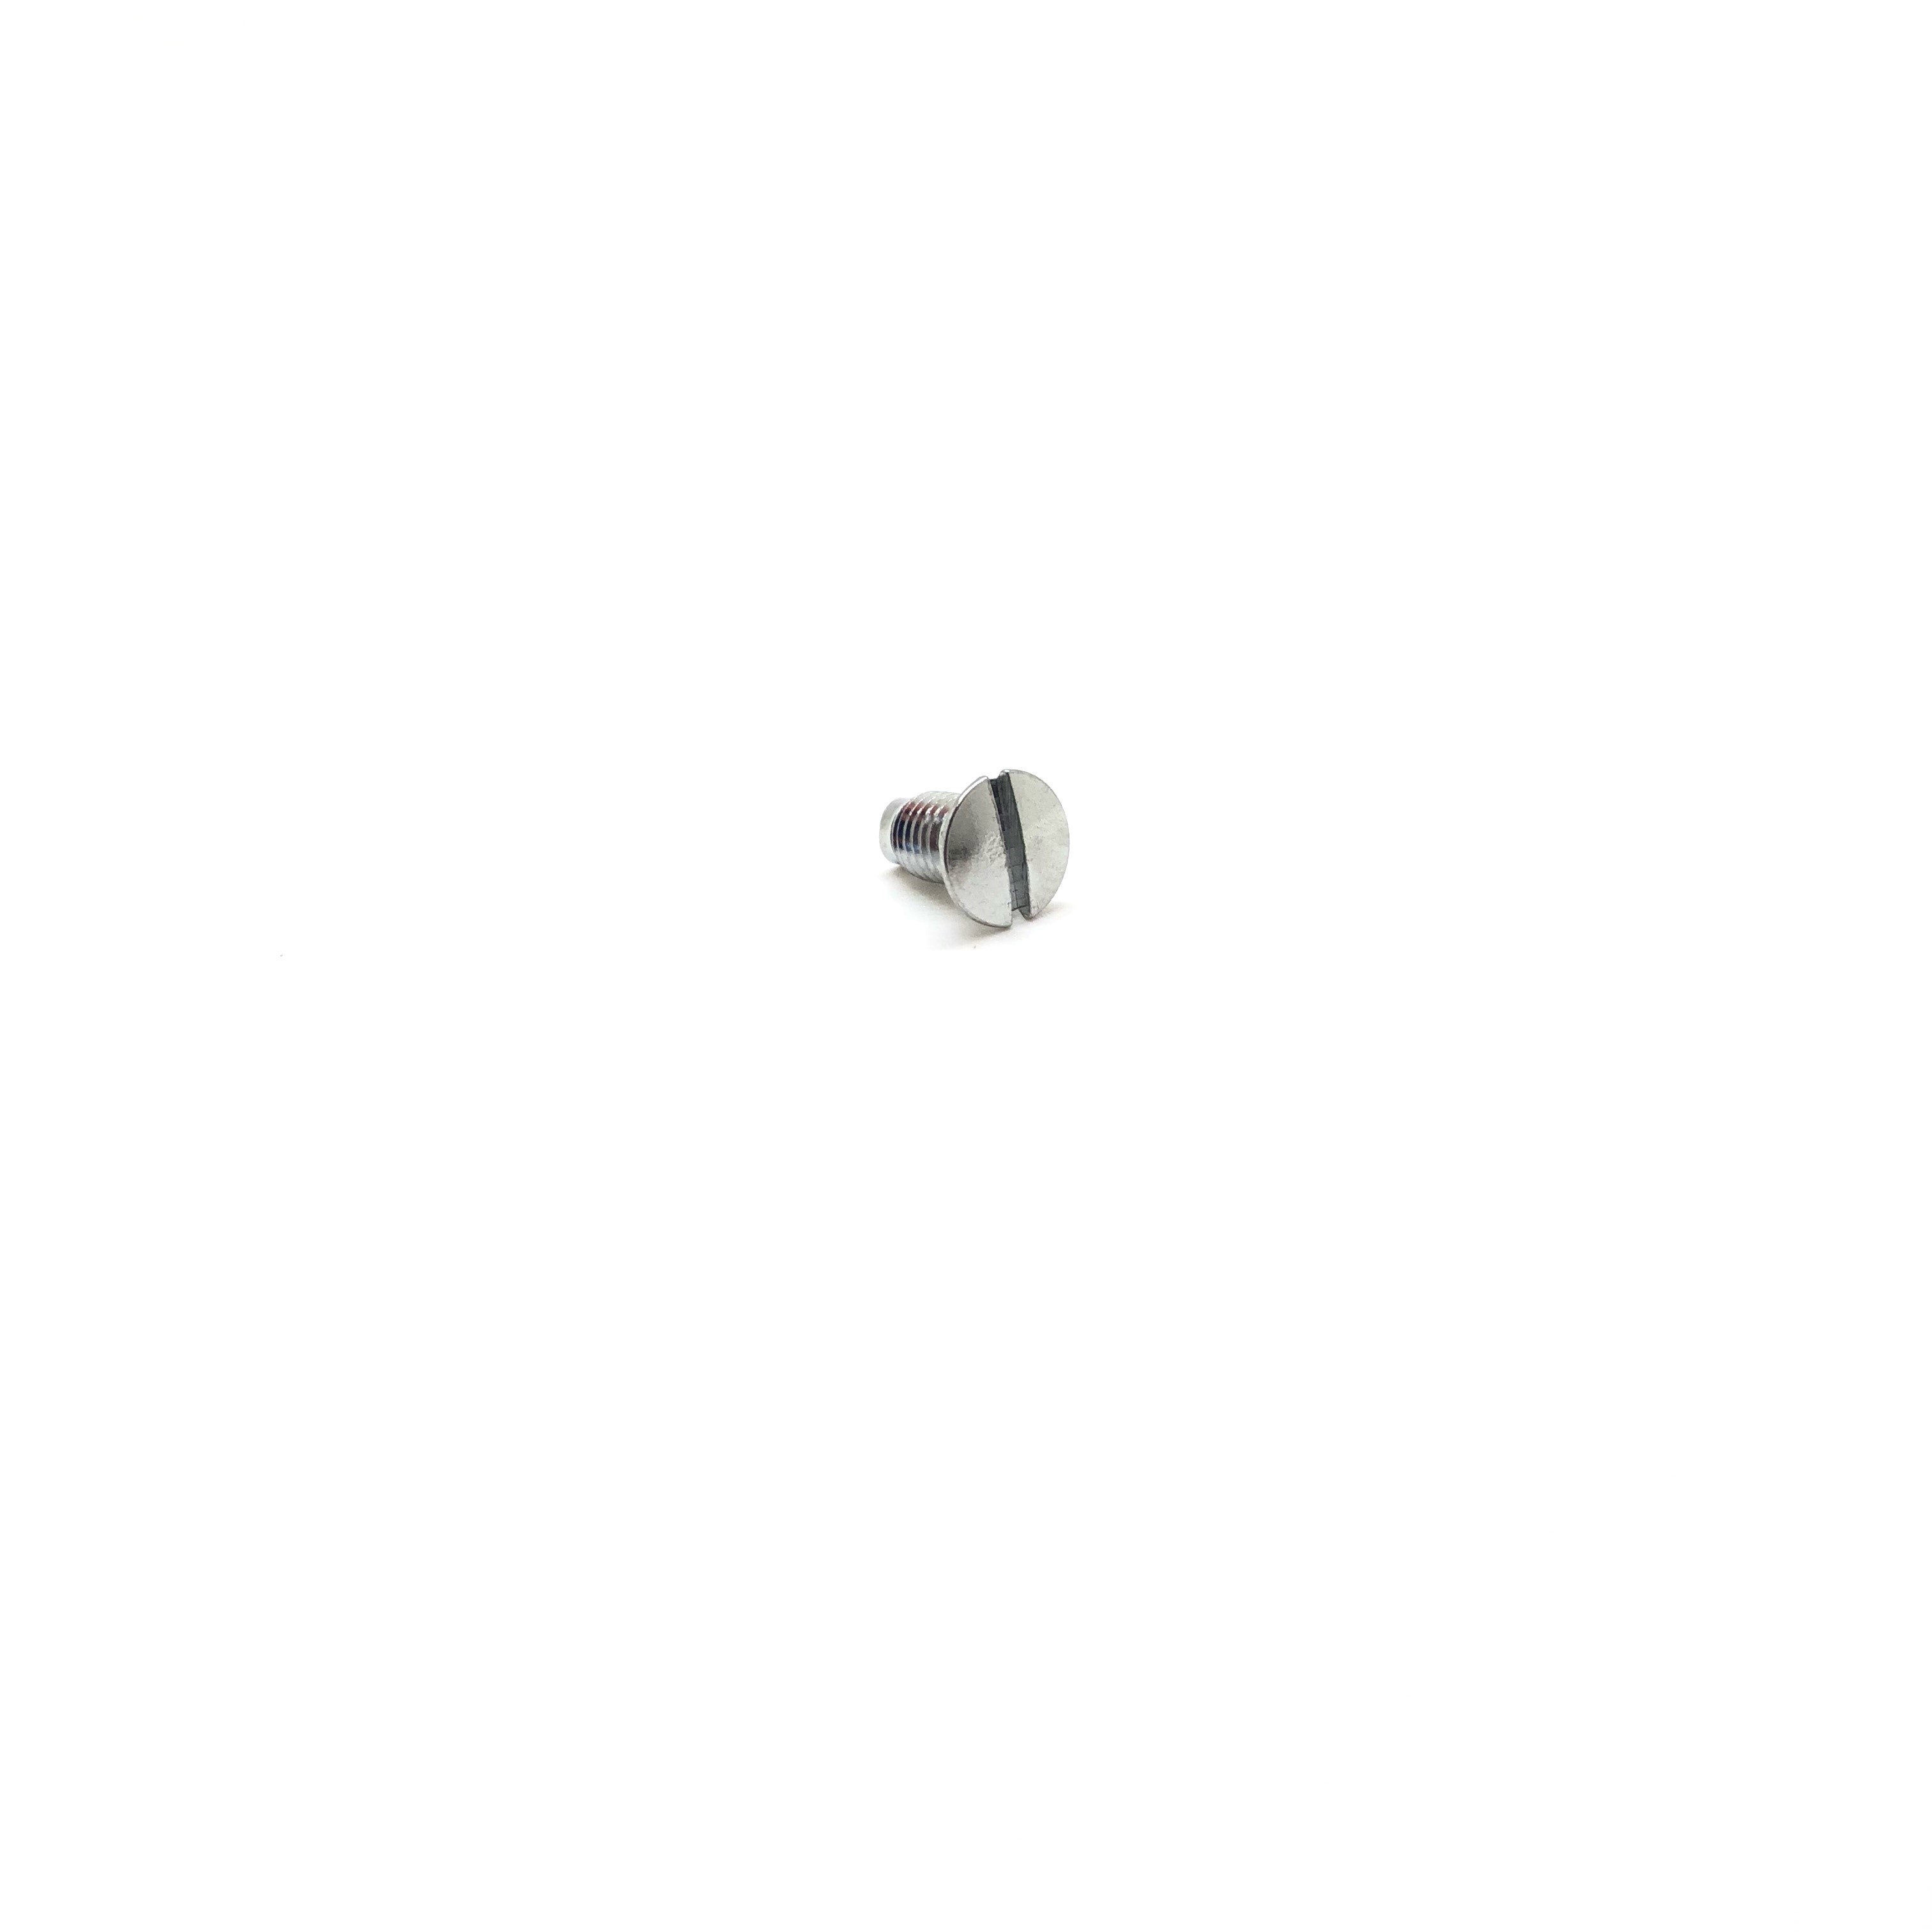 G09-1-26 - NEEDLE PLATE SCREW FOR SOLENT S617D